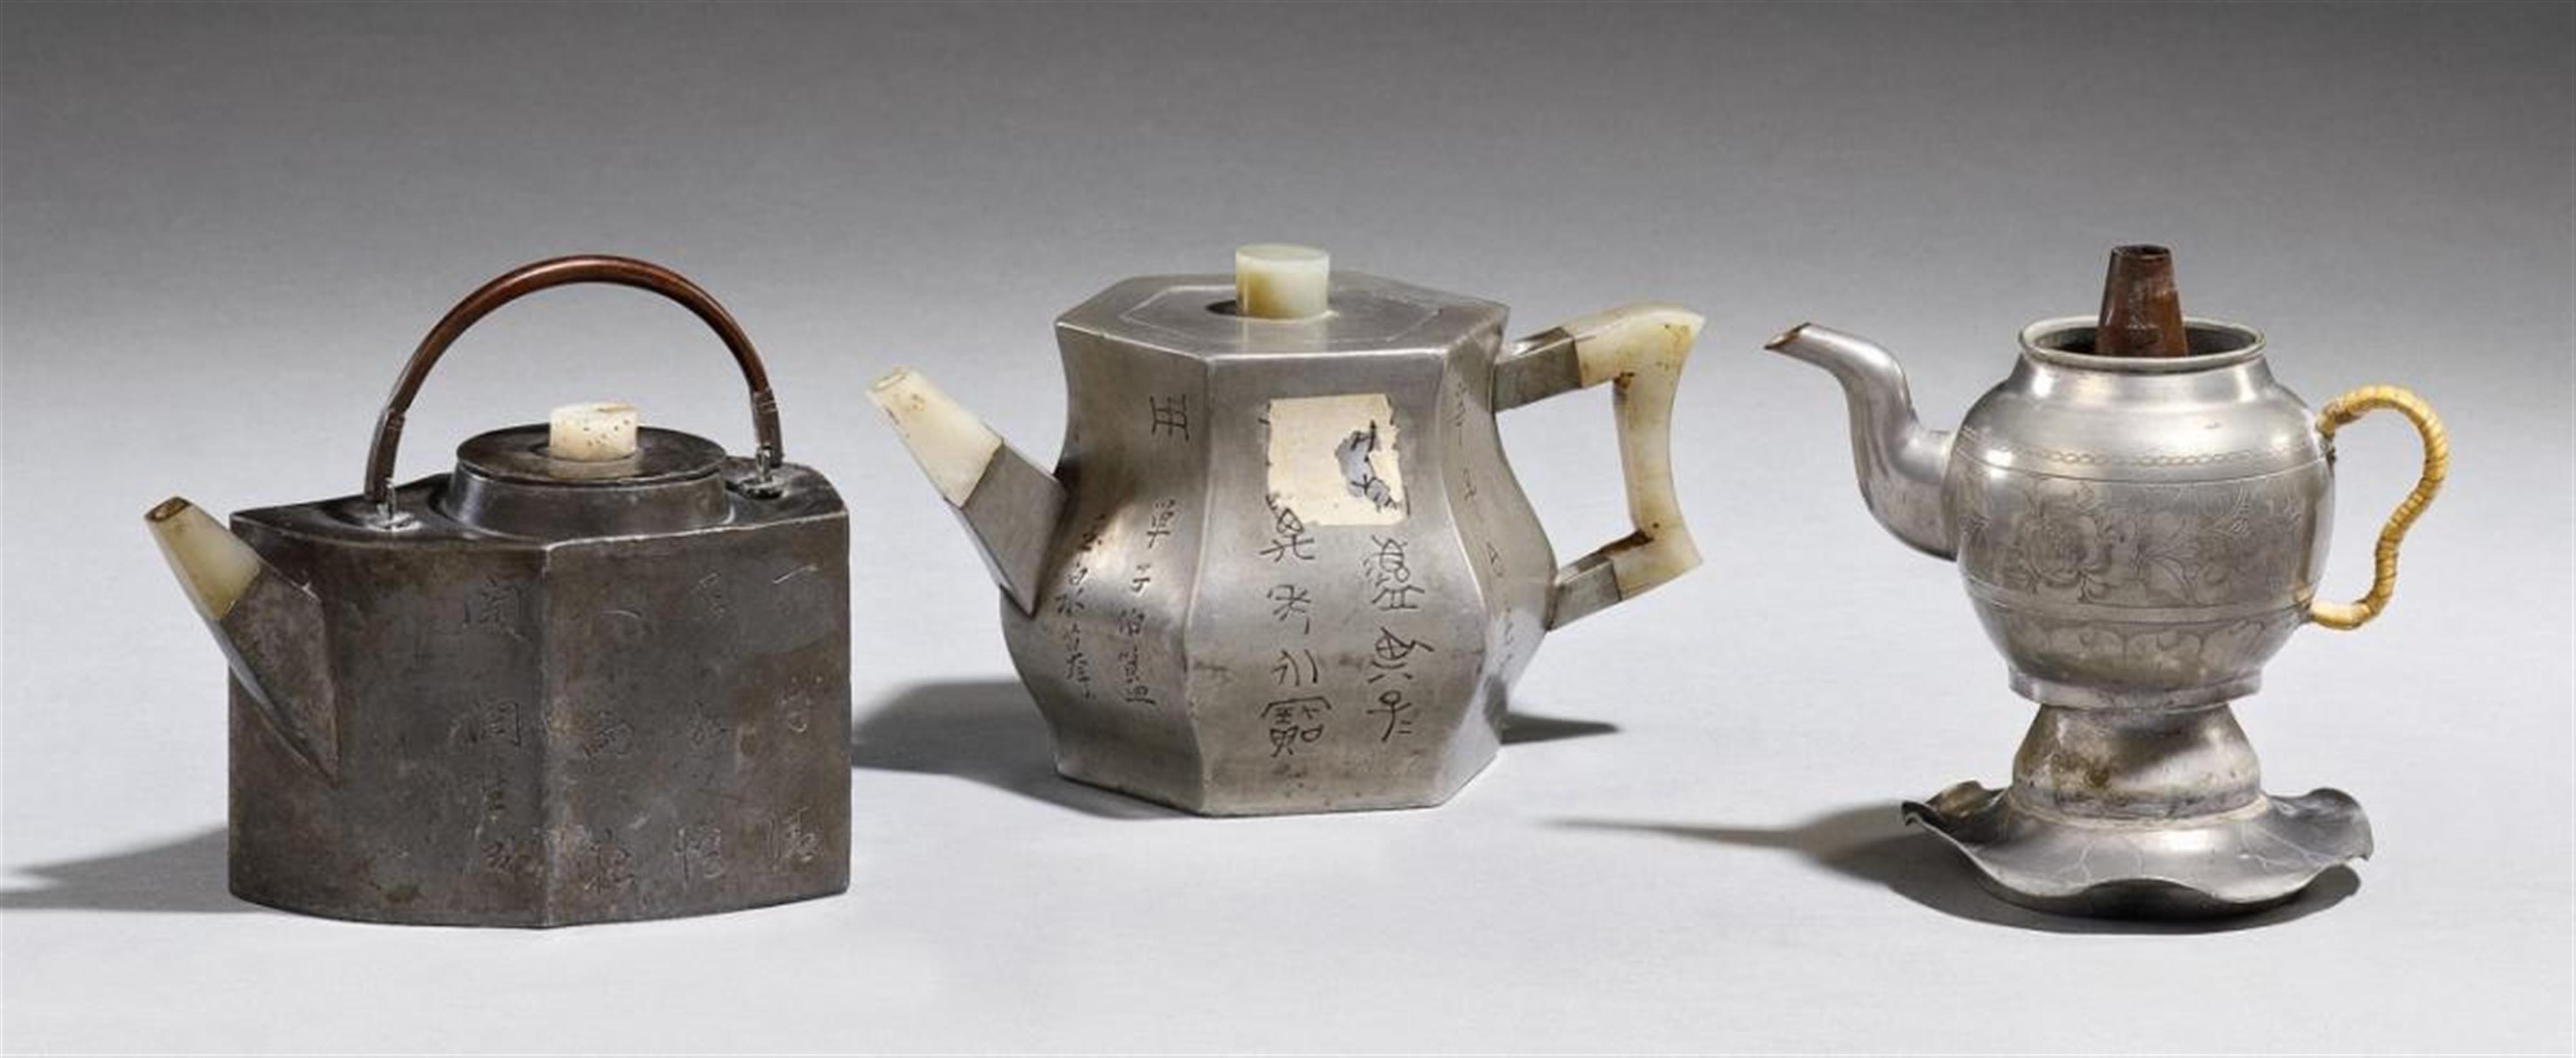 A group of three paktong teapots. Around 1900 - image-1